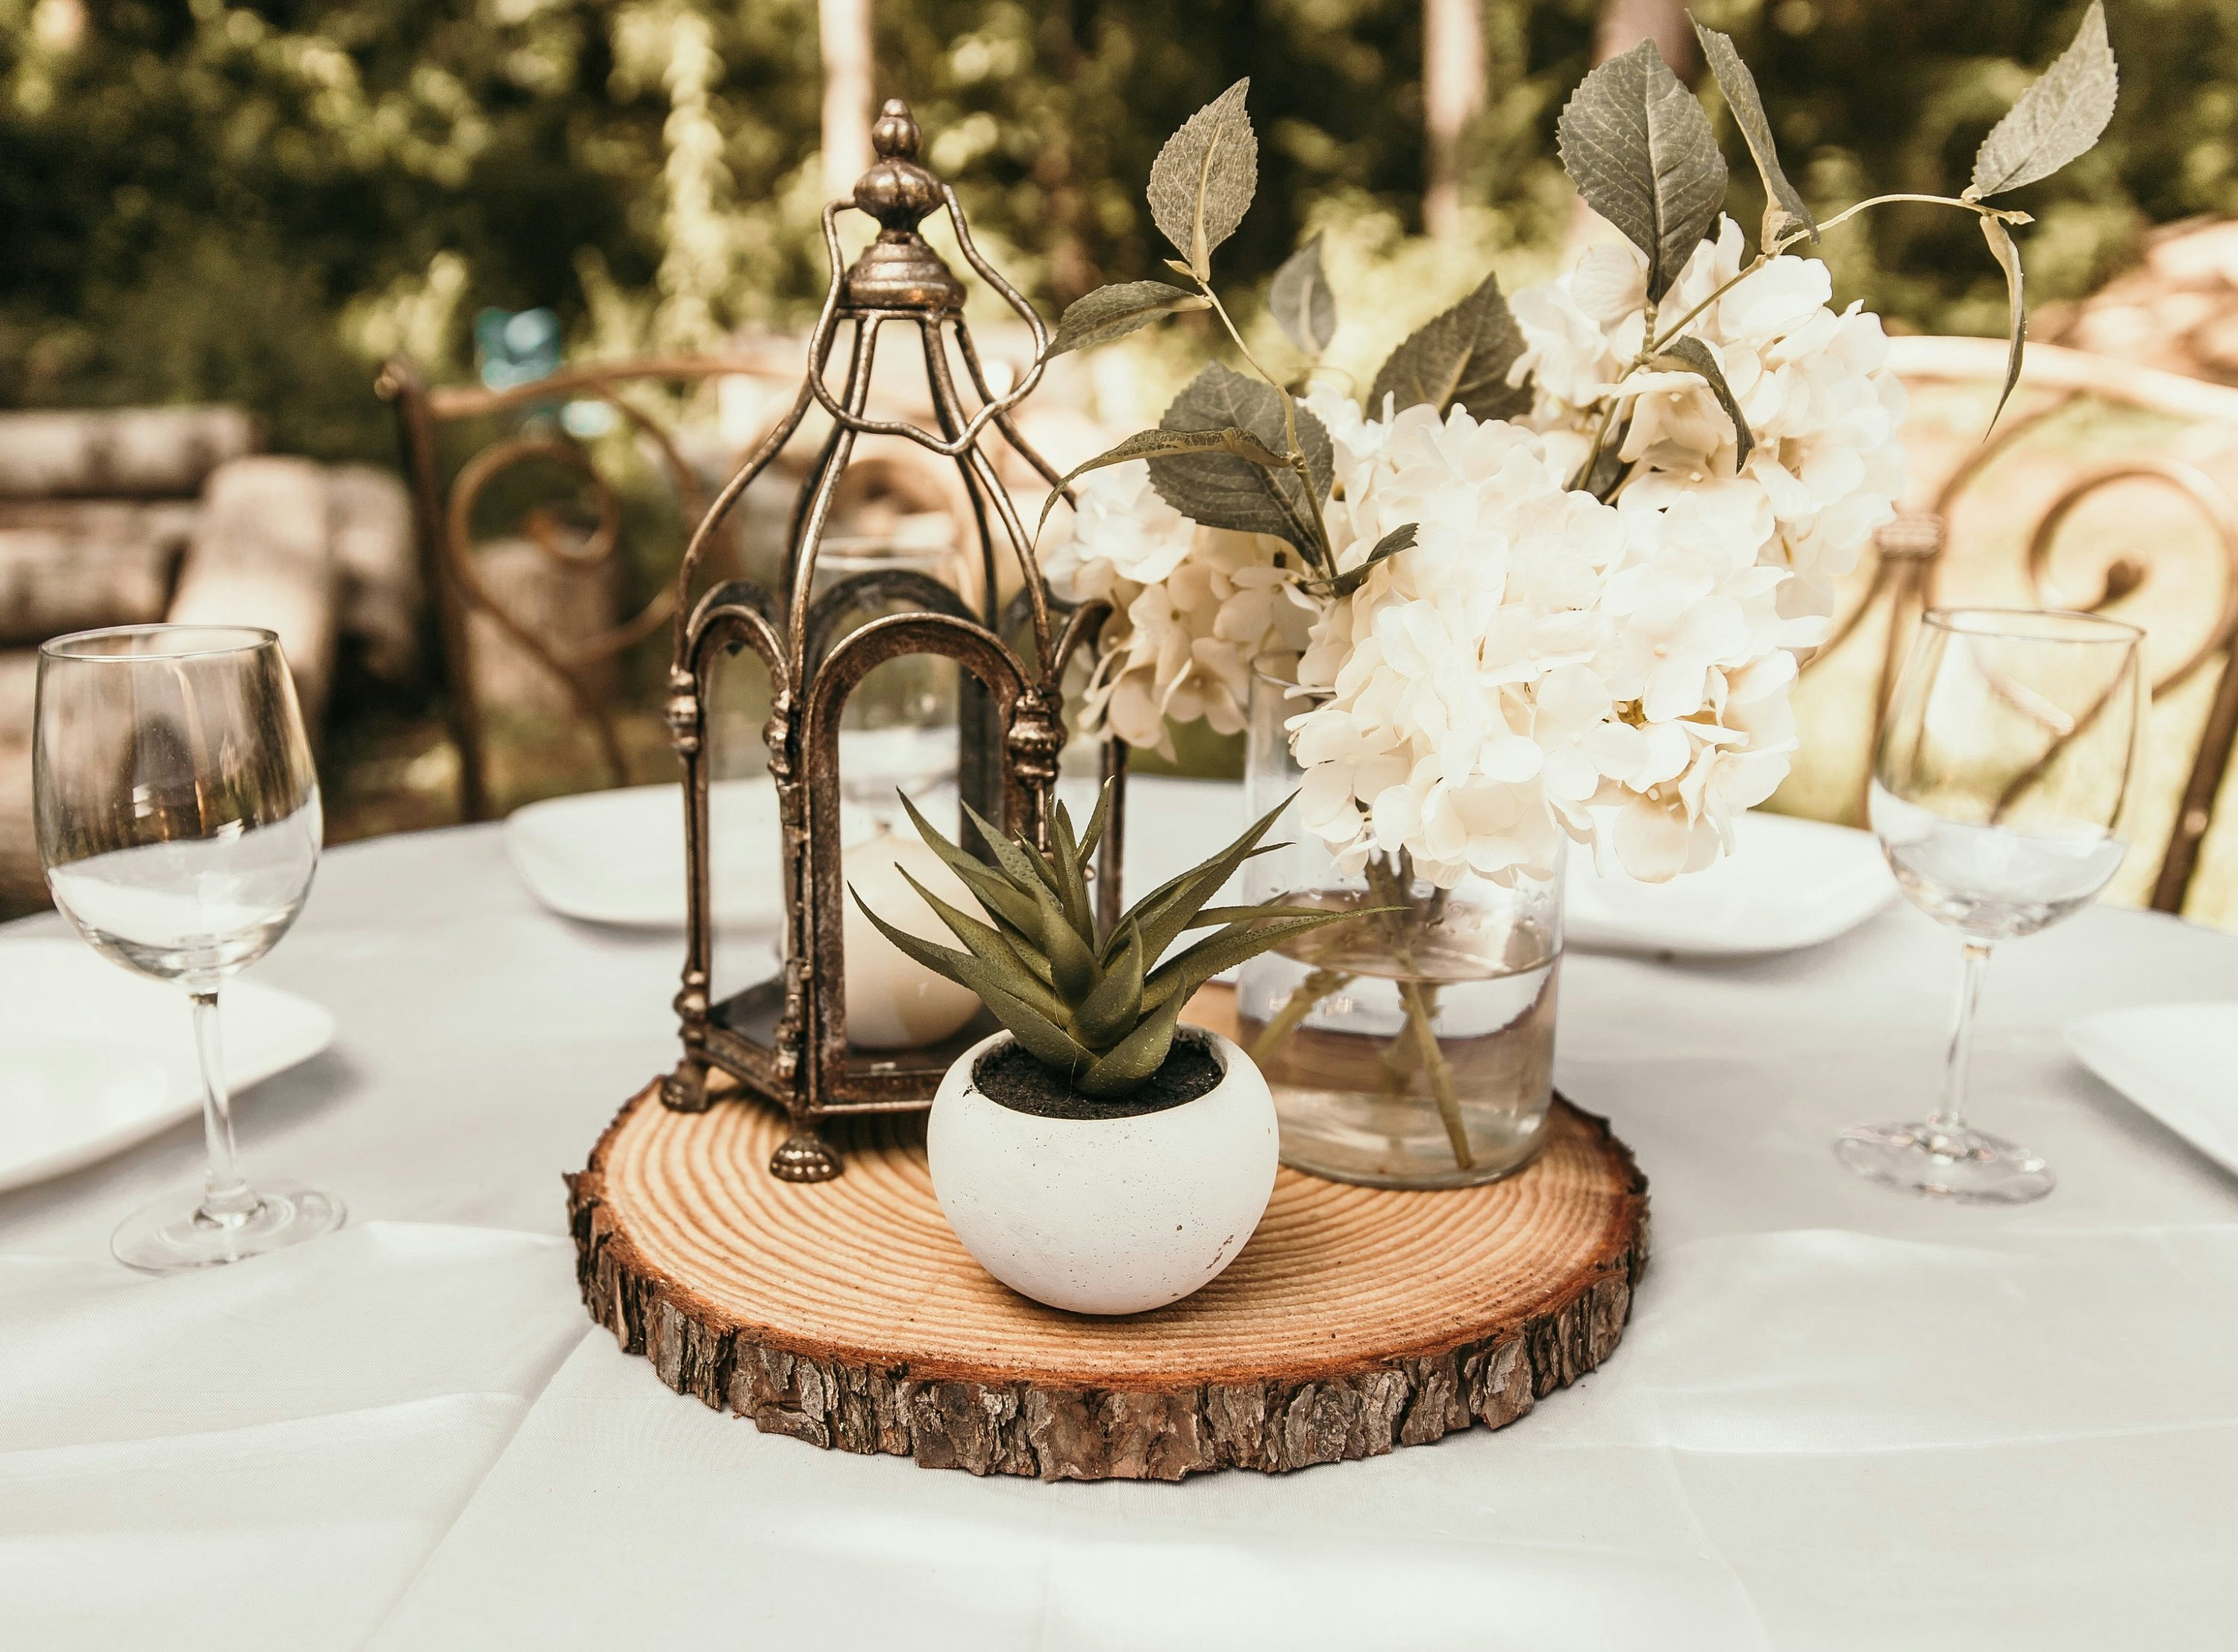 19 Items For Your Rustic Wedding